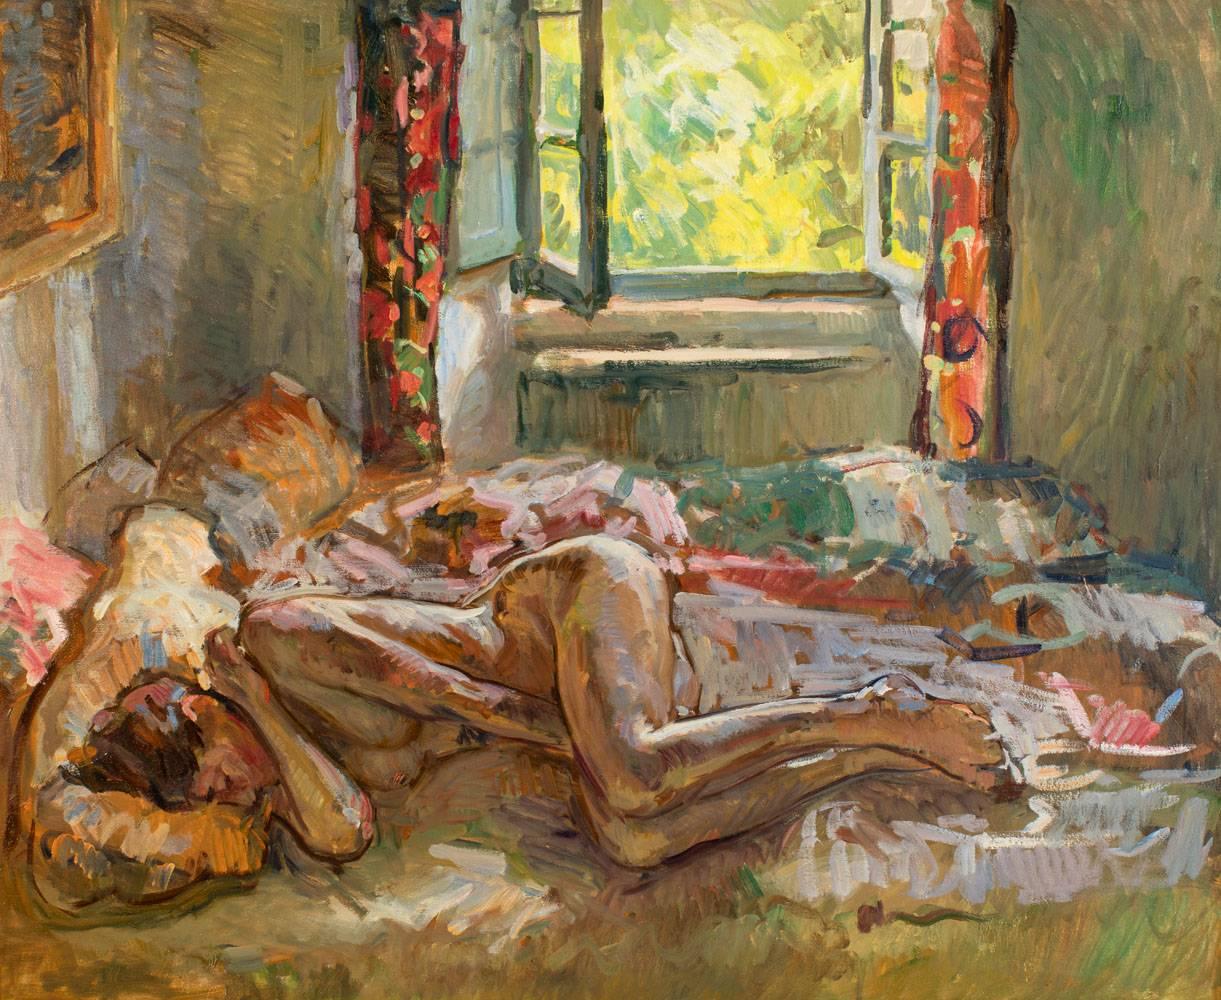 "Daydream" contemporary impressionist painting, reclining nude at rest, colorful